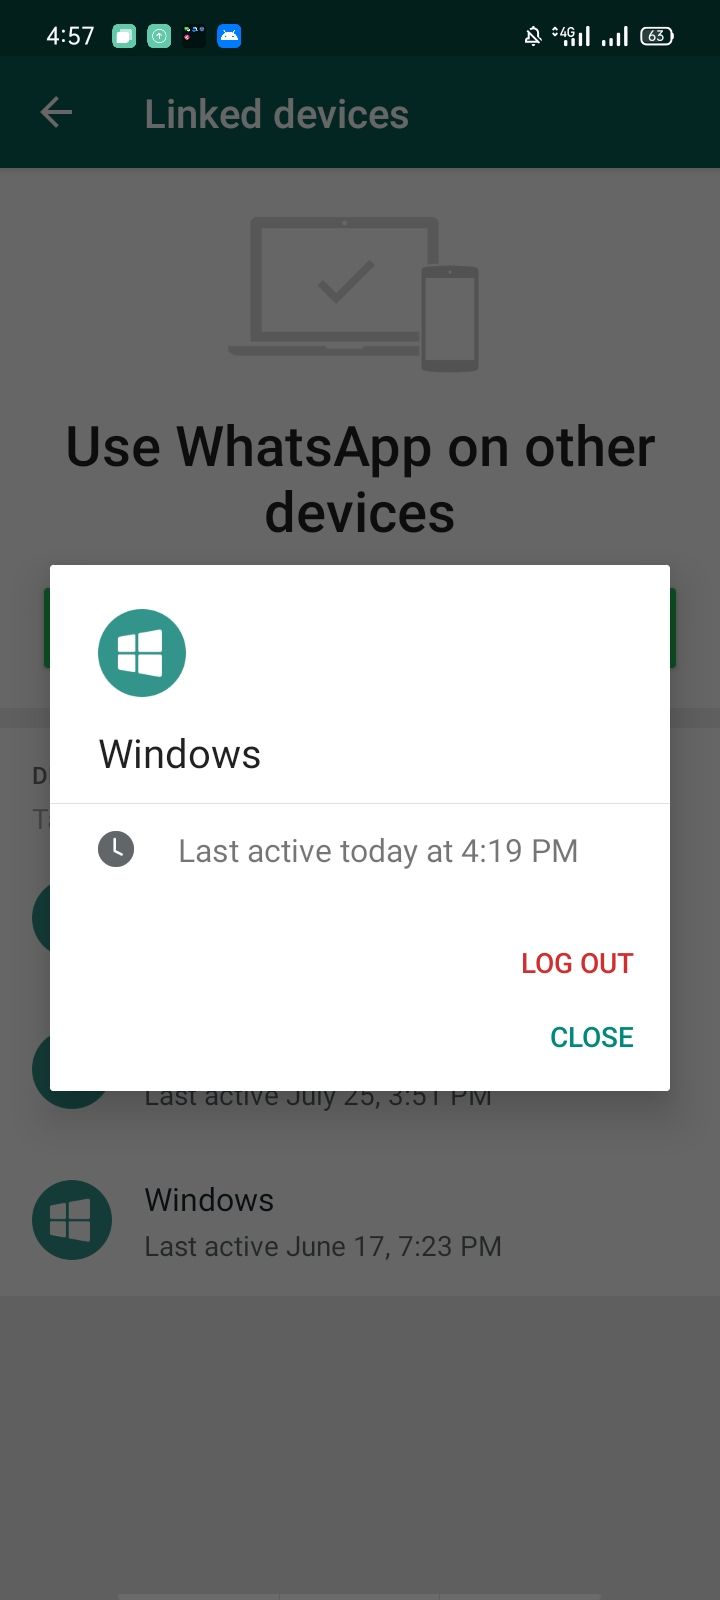 Logging-Out-WhatsApp-From-Linked-Device